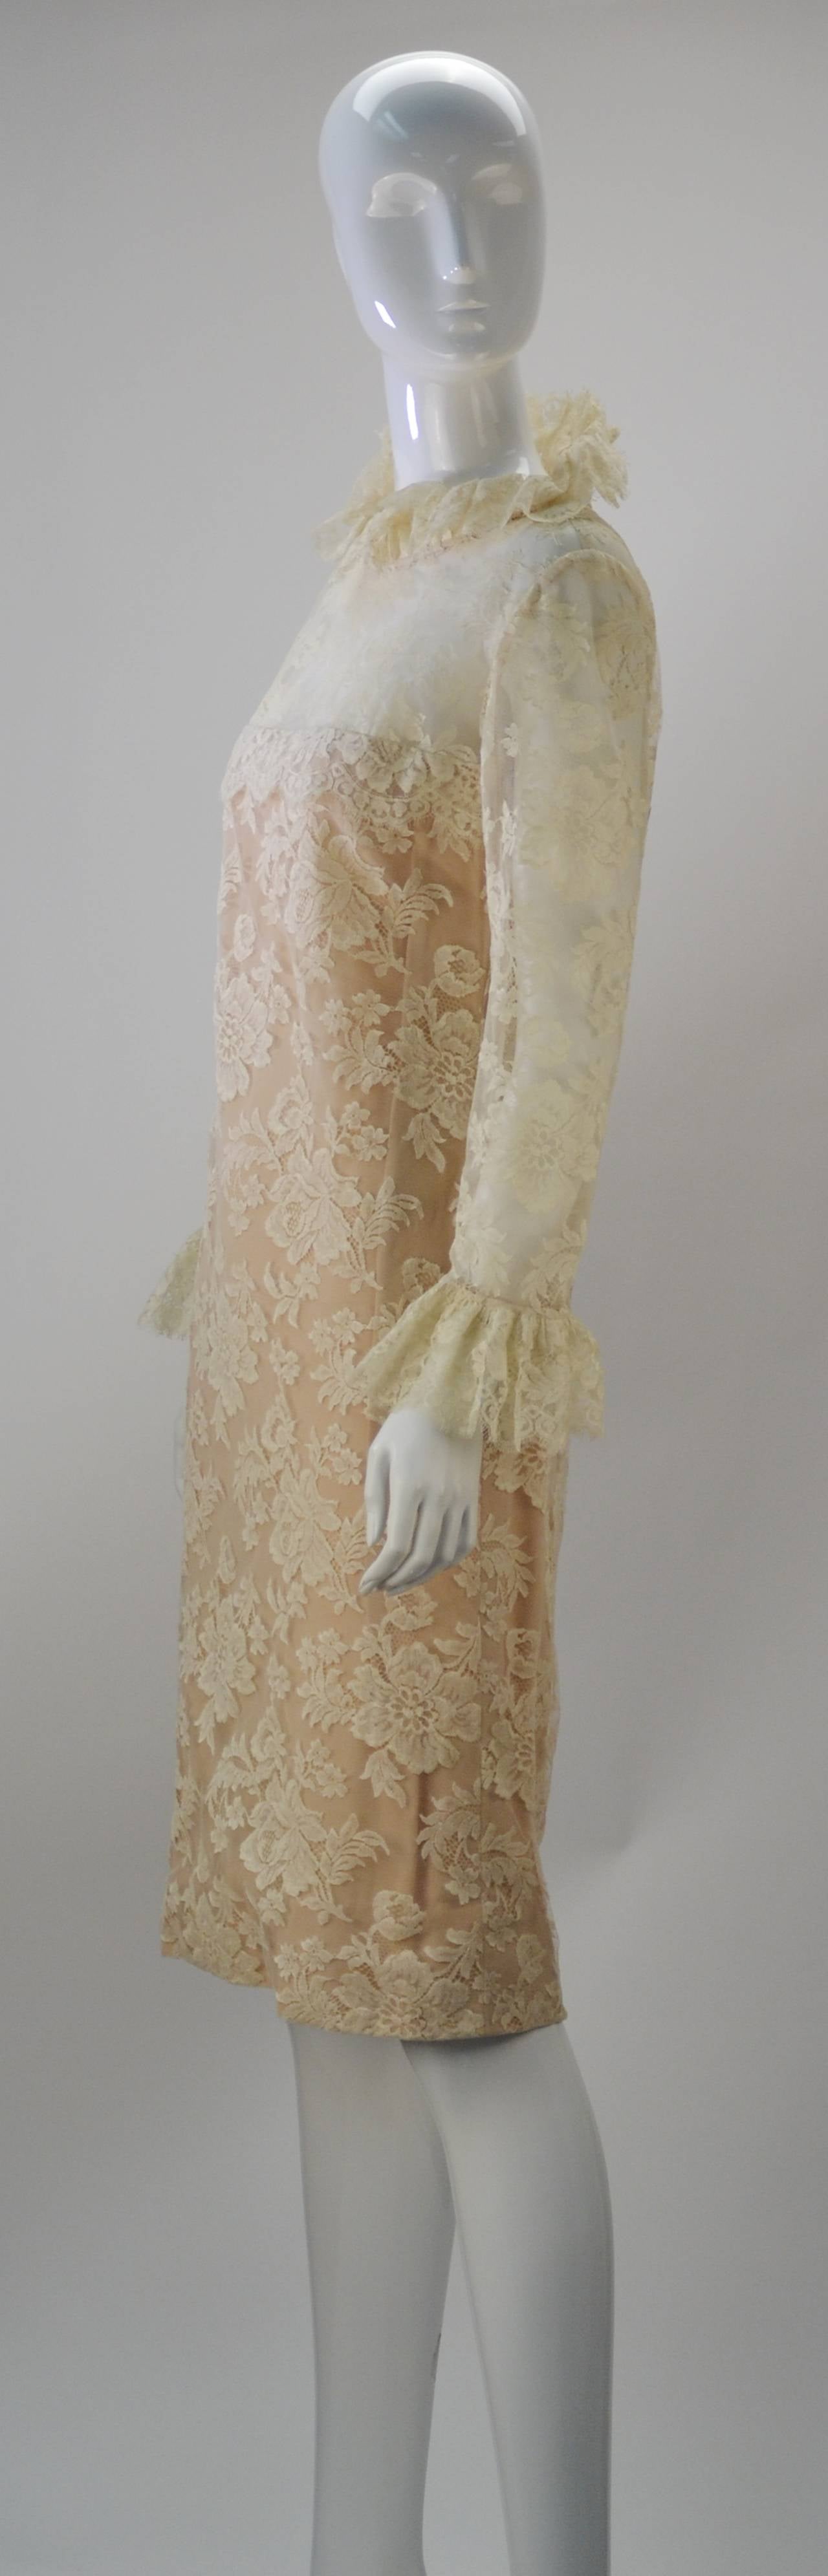 1960's Bill Blass for Maurice Rentner ivory long sleeve dress with Chantilly lace overlay screams Victorian with its ruffle neck. The sleeve hems also offer a whimsical ruffle detail, giving the dress added femininity. The dress fastens by a back